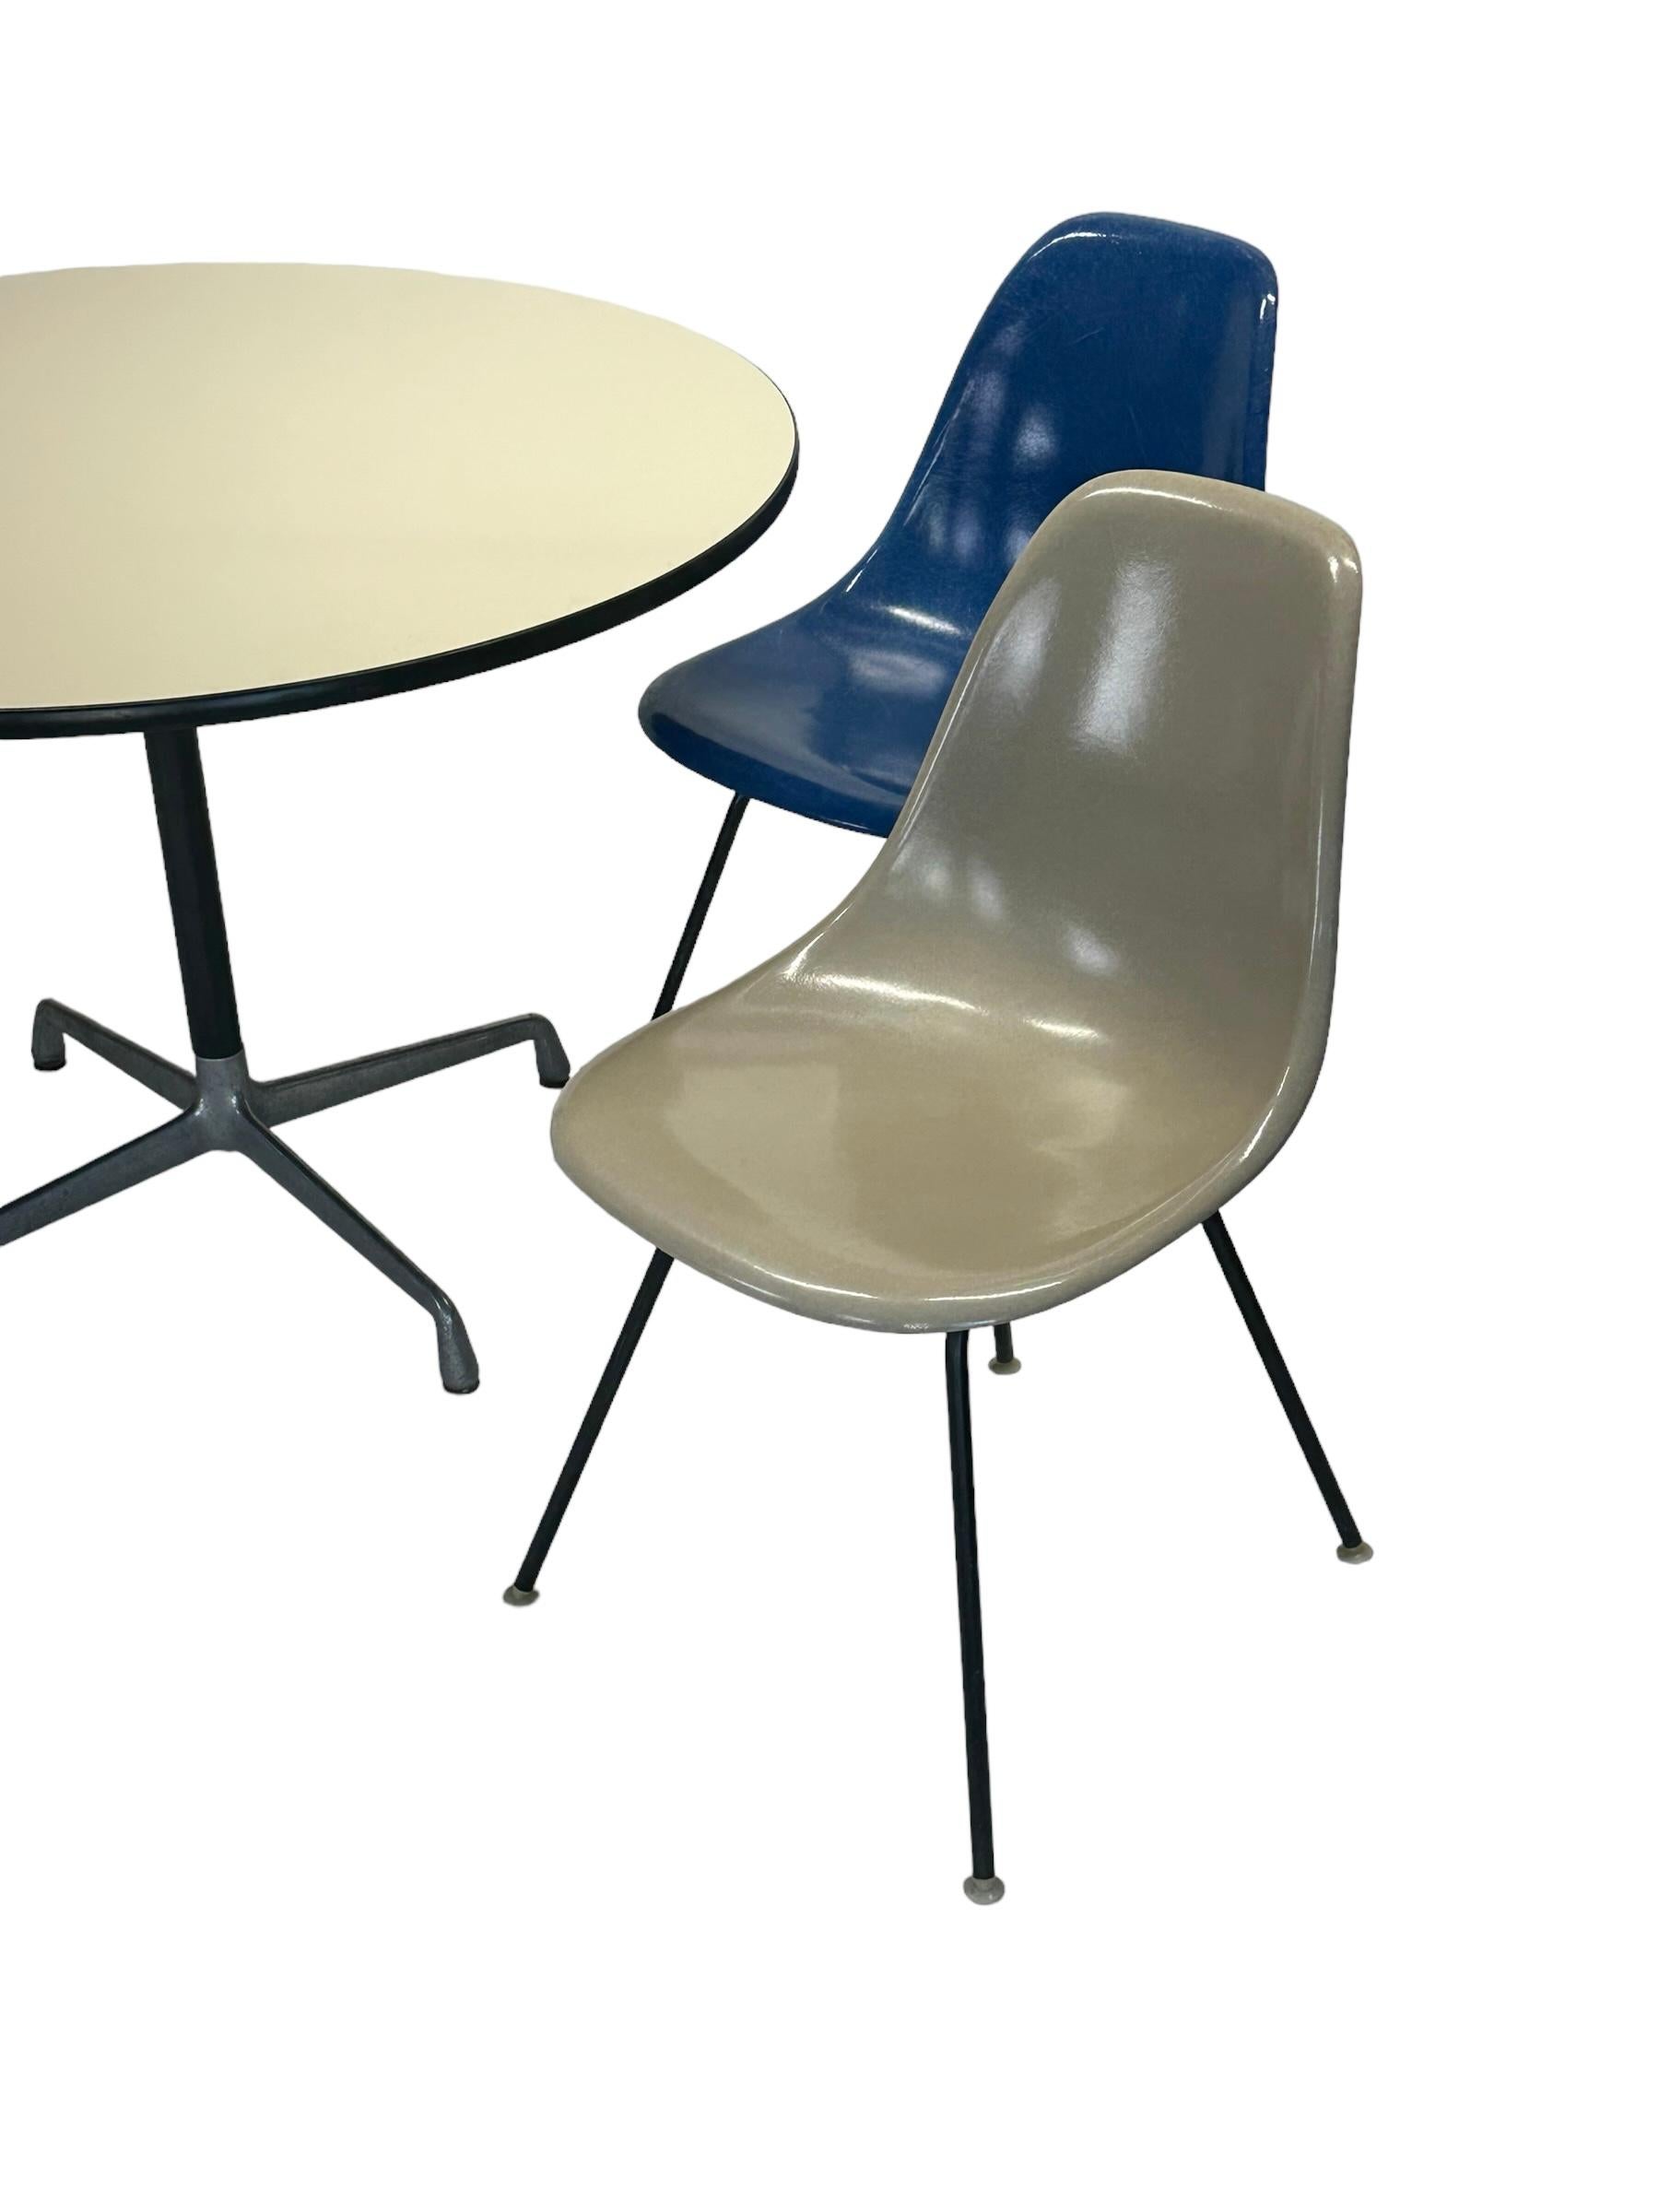 American Herman Miller Eames Dining Chair and Table Set For Sale